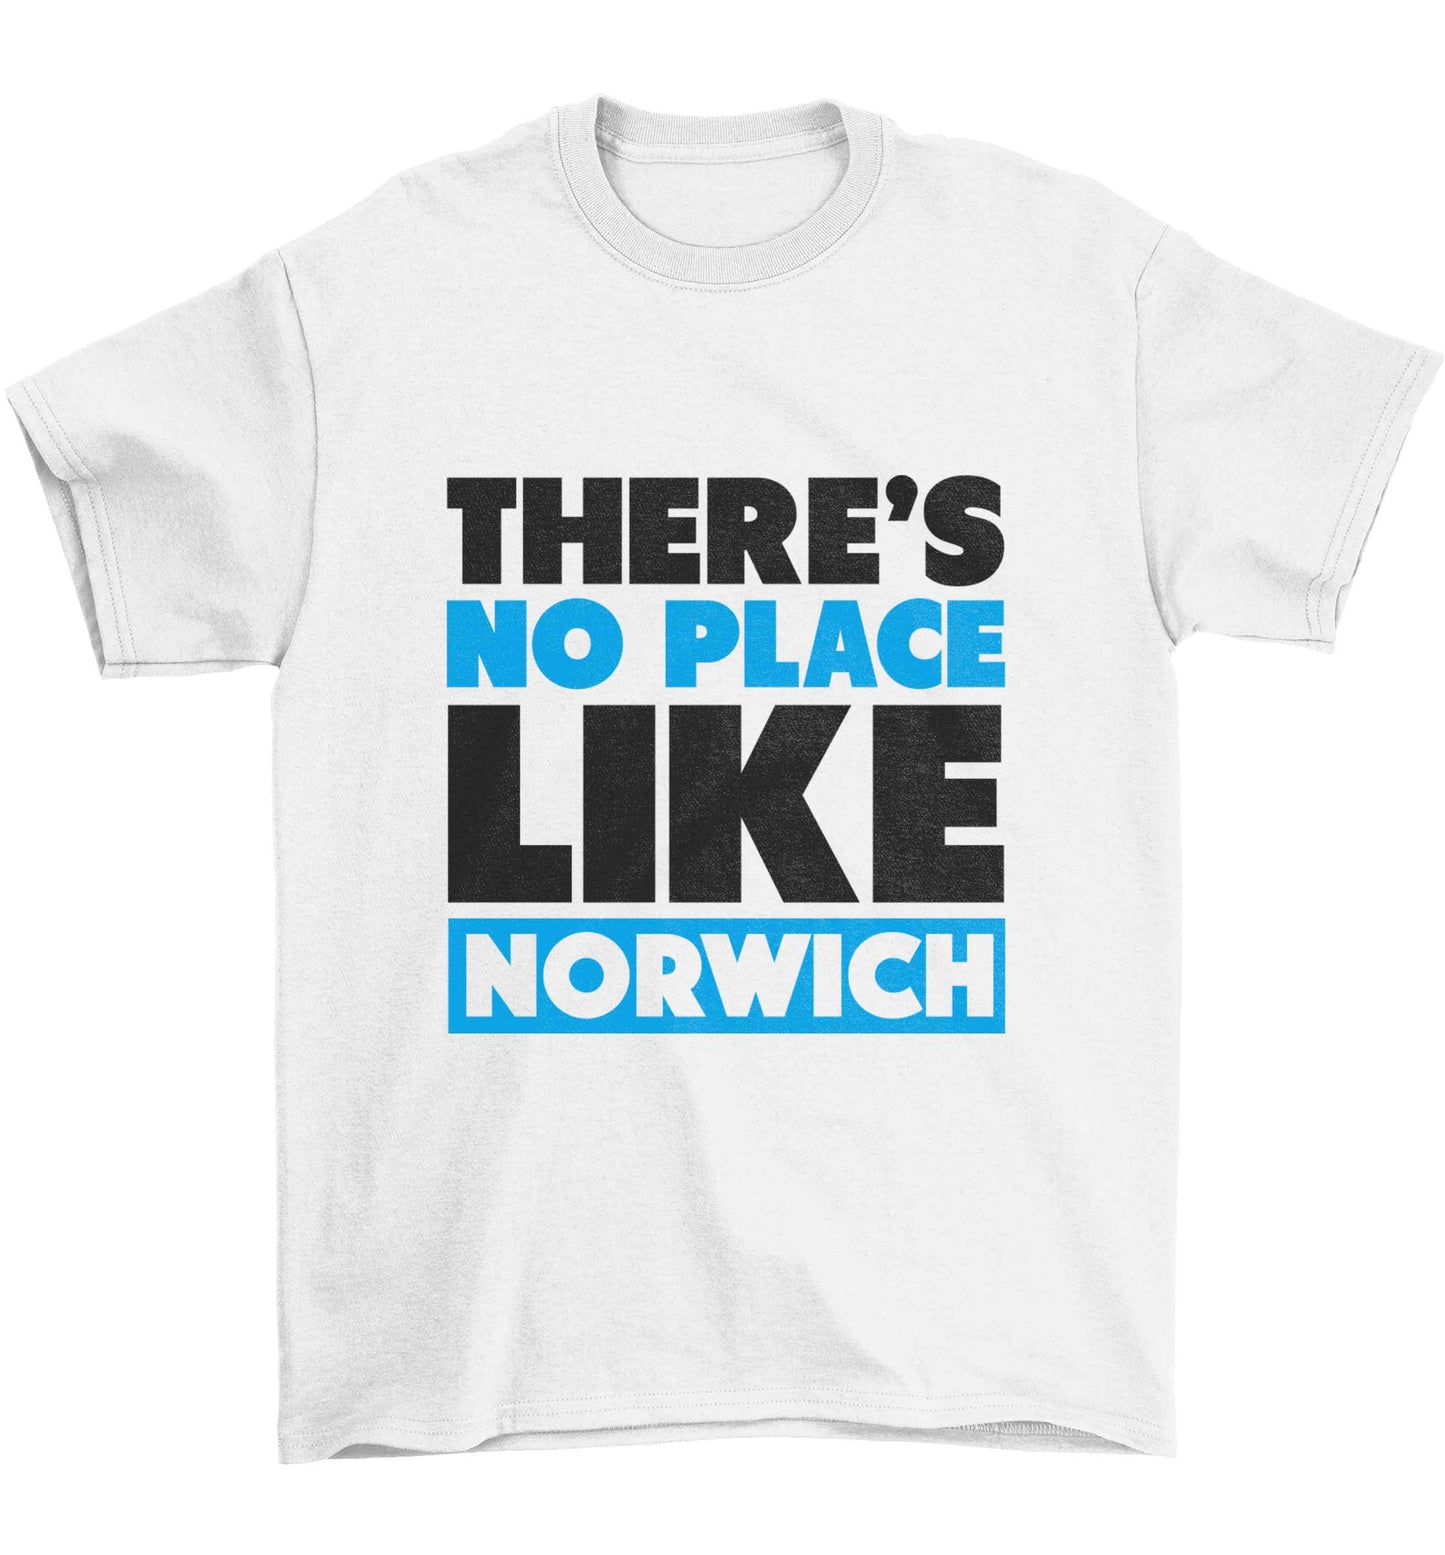 There's no place like Norwich Children's white Tshirt 12-13 Years